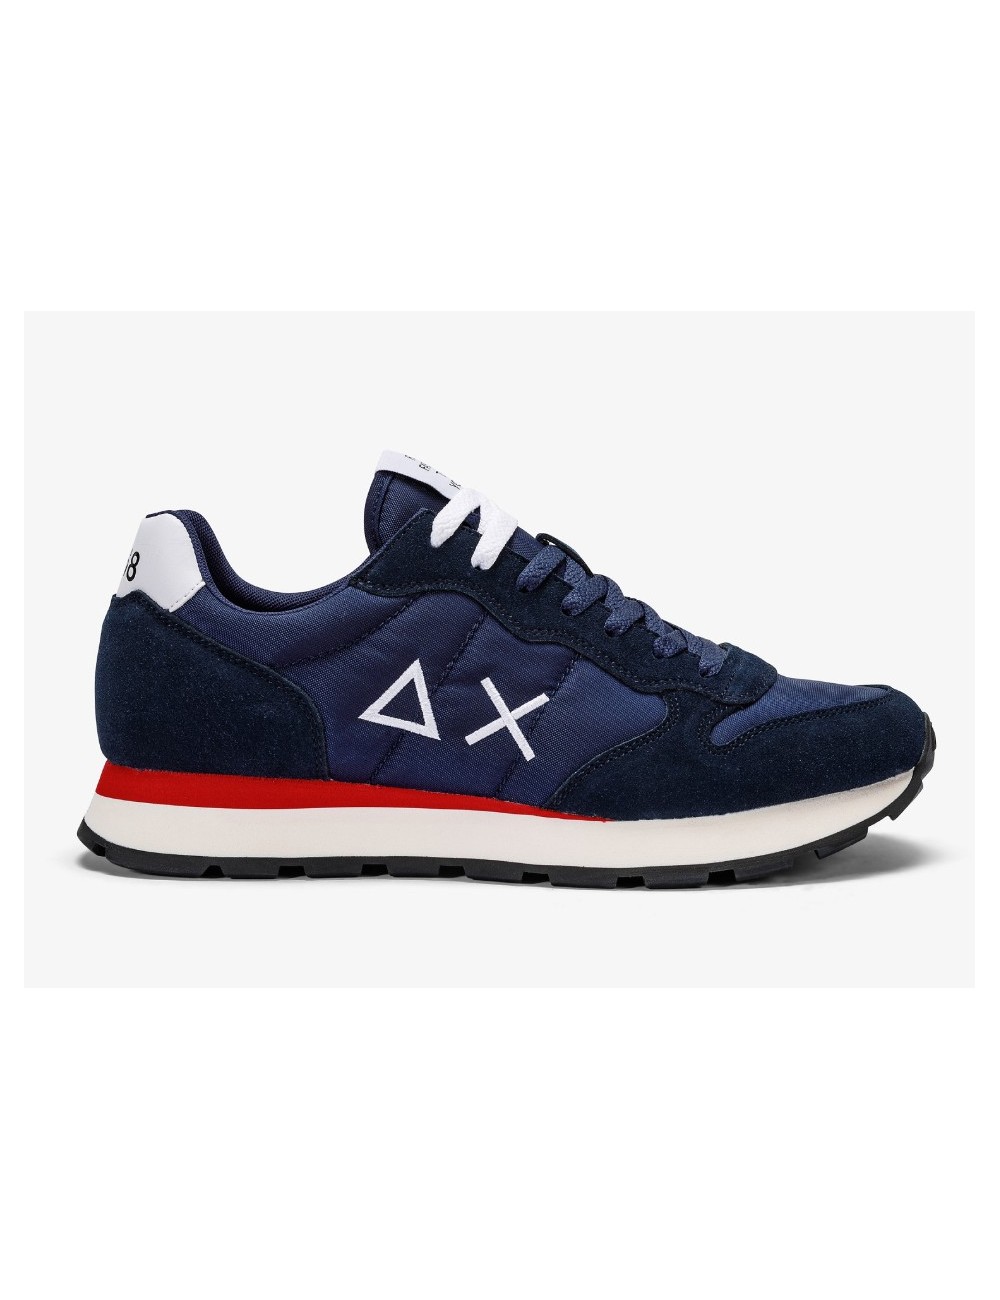 TOM SOLID NYLON NAVY BLUE SNEAKERS